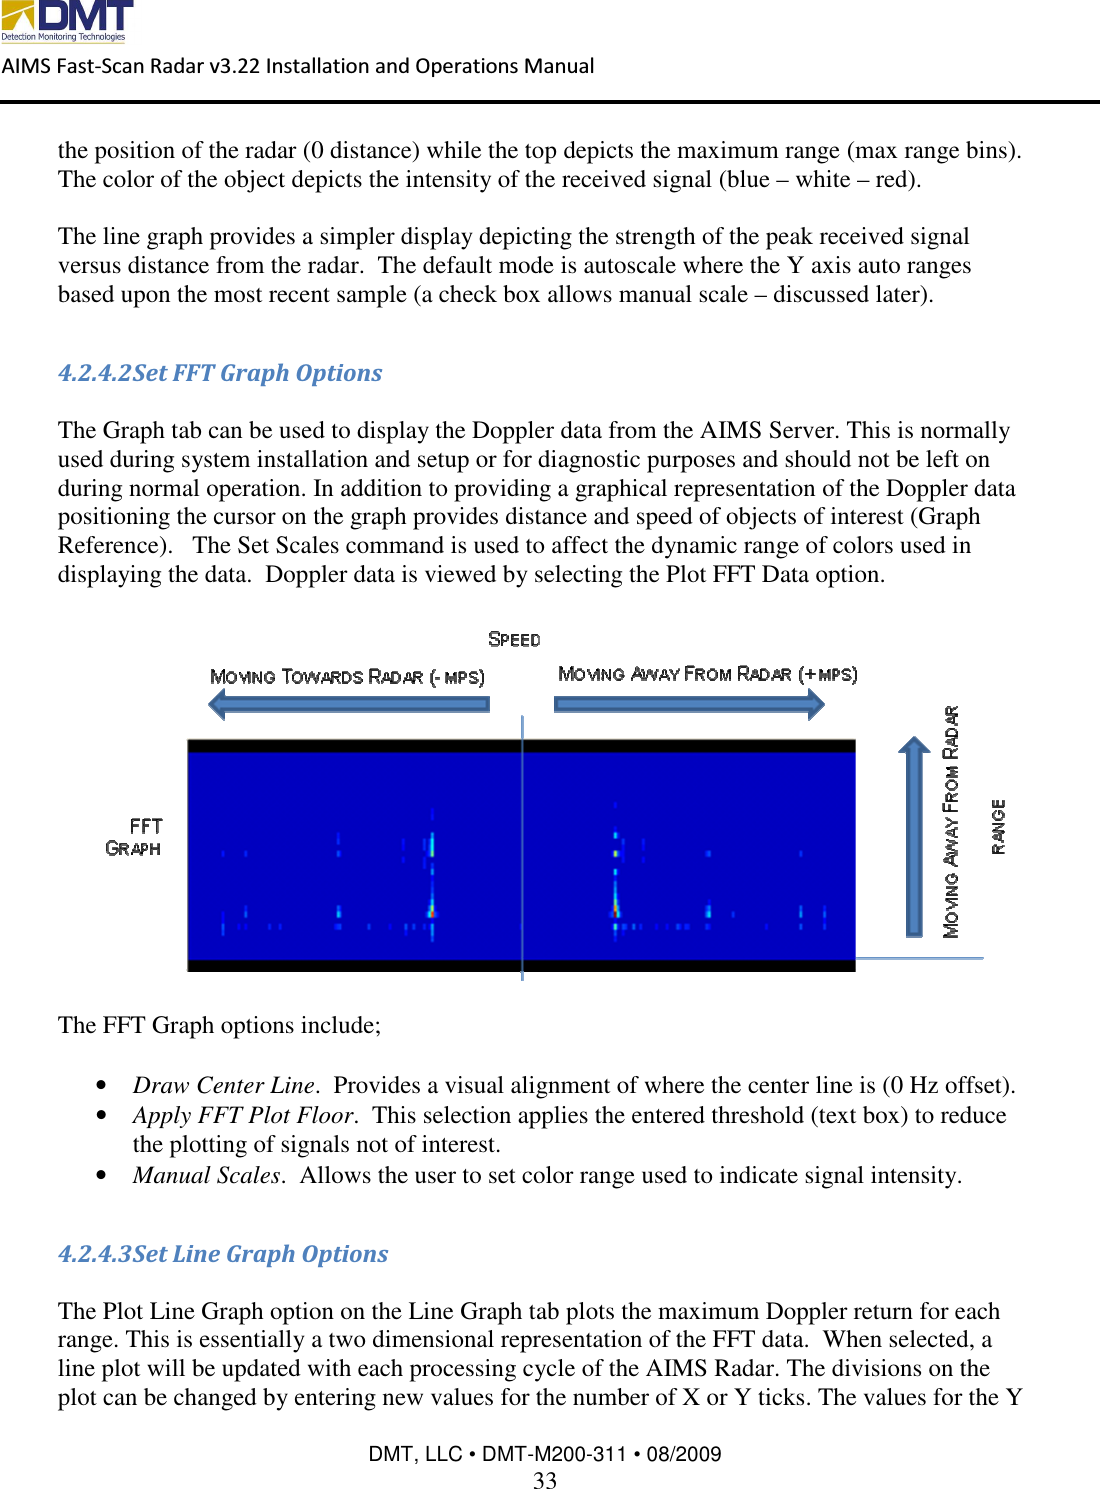  AIMS Fast-Scan Radar v3.22 Installation and Operations Manual    DMT, LLC • DMT-M200-311 • 08/2009 33  the position of the radar (0 distance) while the top depicts the maximum range (max range bins).  The color of the object depicts the intensity of the received signal (blue – white – red).  The line graph provides a simpler display depicting the strength of the peak received signal versus distance from the radar.  The default mode is autoscale where the Y axis auto ranges based upon the most recent sample (a check box allows manual scale – discussed later).  4.2.4.2 Set FFT Graph Options  The Graph tab can be used to display the Doppler data from the AIMS Server. This is normally used during system installation and setup or for diagnostic purposes and should not be left on during normal operation. In addition to providing a graphical representation of the Doppler data positioning the cursor on the graph provides distance and speed of objects of interest (Graph Reference).   The Set Scales command is used to affect the dynamic range of colors used in displaying the data.  Doppler data is viewed by selecting the Plot FFT Data option.    The FFT Graph options include;  • Draw Center Line.  Provides a visual alignment of where the center line is (0 Hz offset). • Apply FFT Plot Floor.  This selection applies the entered threshold (text box) to reduce the plotting of signals not of interest. • Manual Scales.  Allows the user to set color range used to indicate signal intensity.  4.2.4.3 Set Line Graph Options  The Plot Line Graph option on the Line Graph tab plots the maximum Doppler return for each range. This is essentially a two dimensional representation of the FFT data.  When selected, a line plot will be updated with each processing cycle of the AIMS Radar. The divisions on the plot can be changed by entering new values for the number of X or Y ticks. The values for the Y 